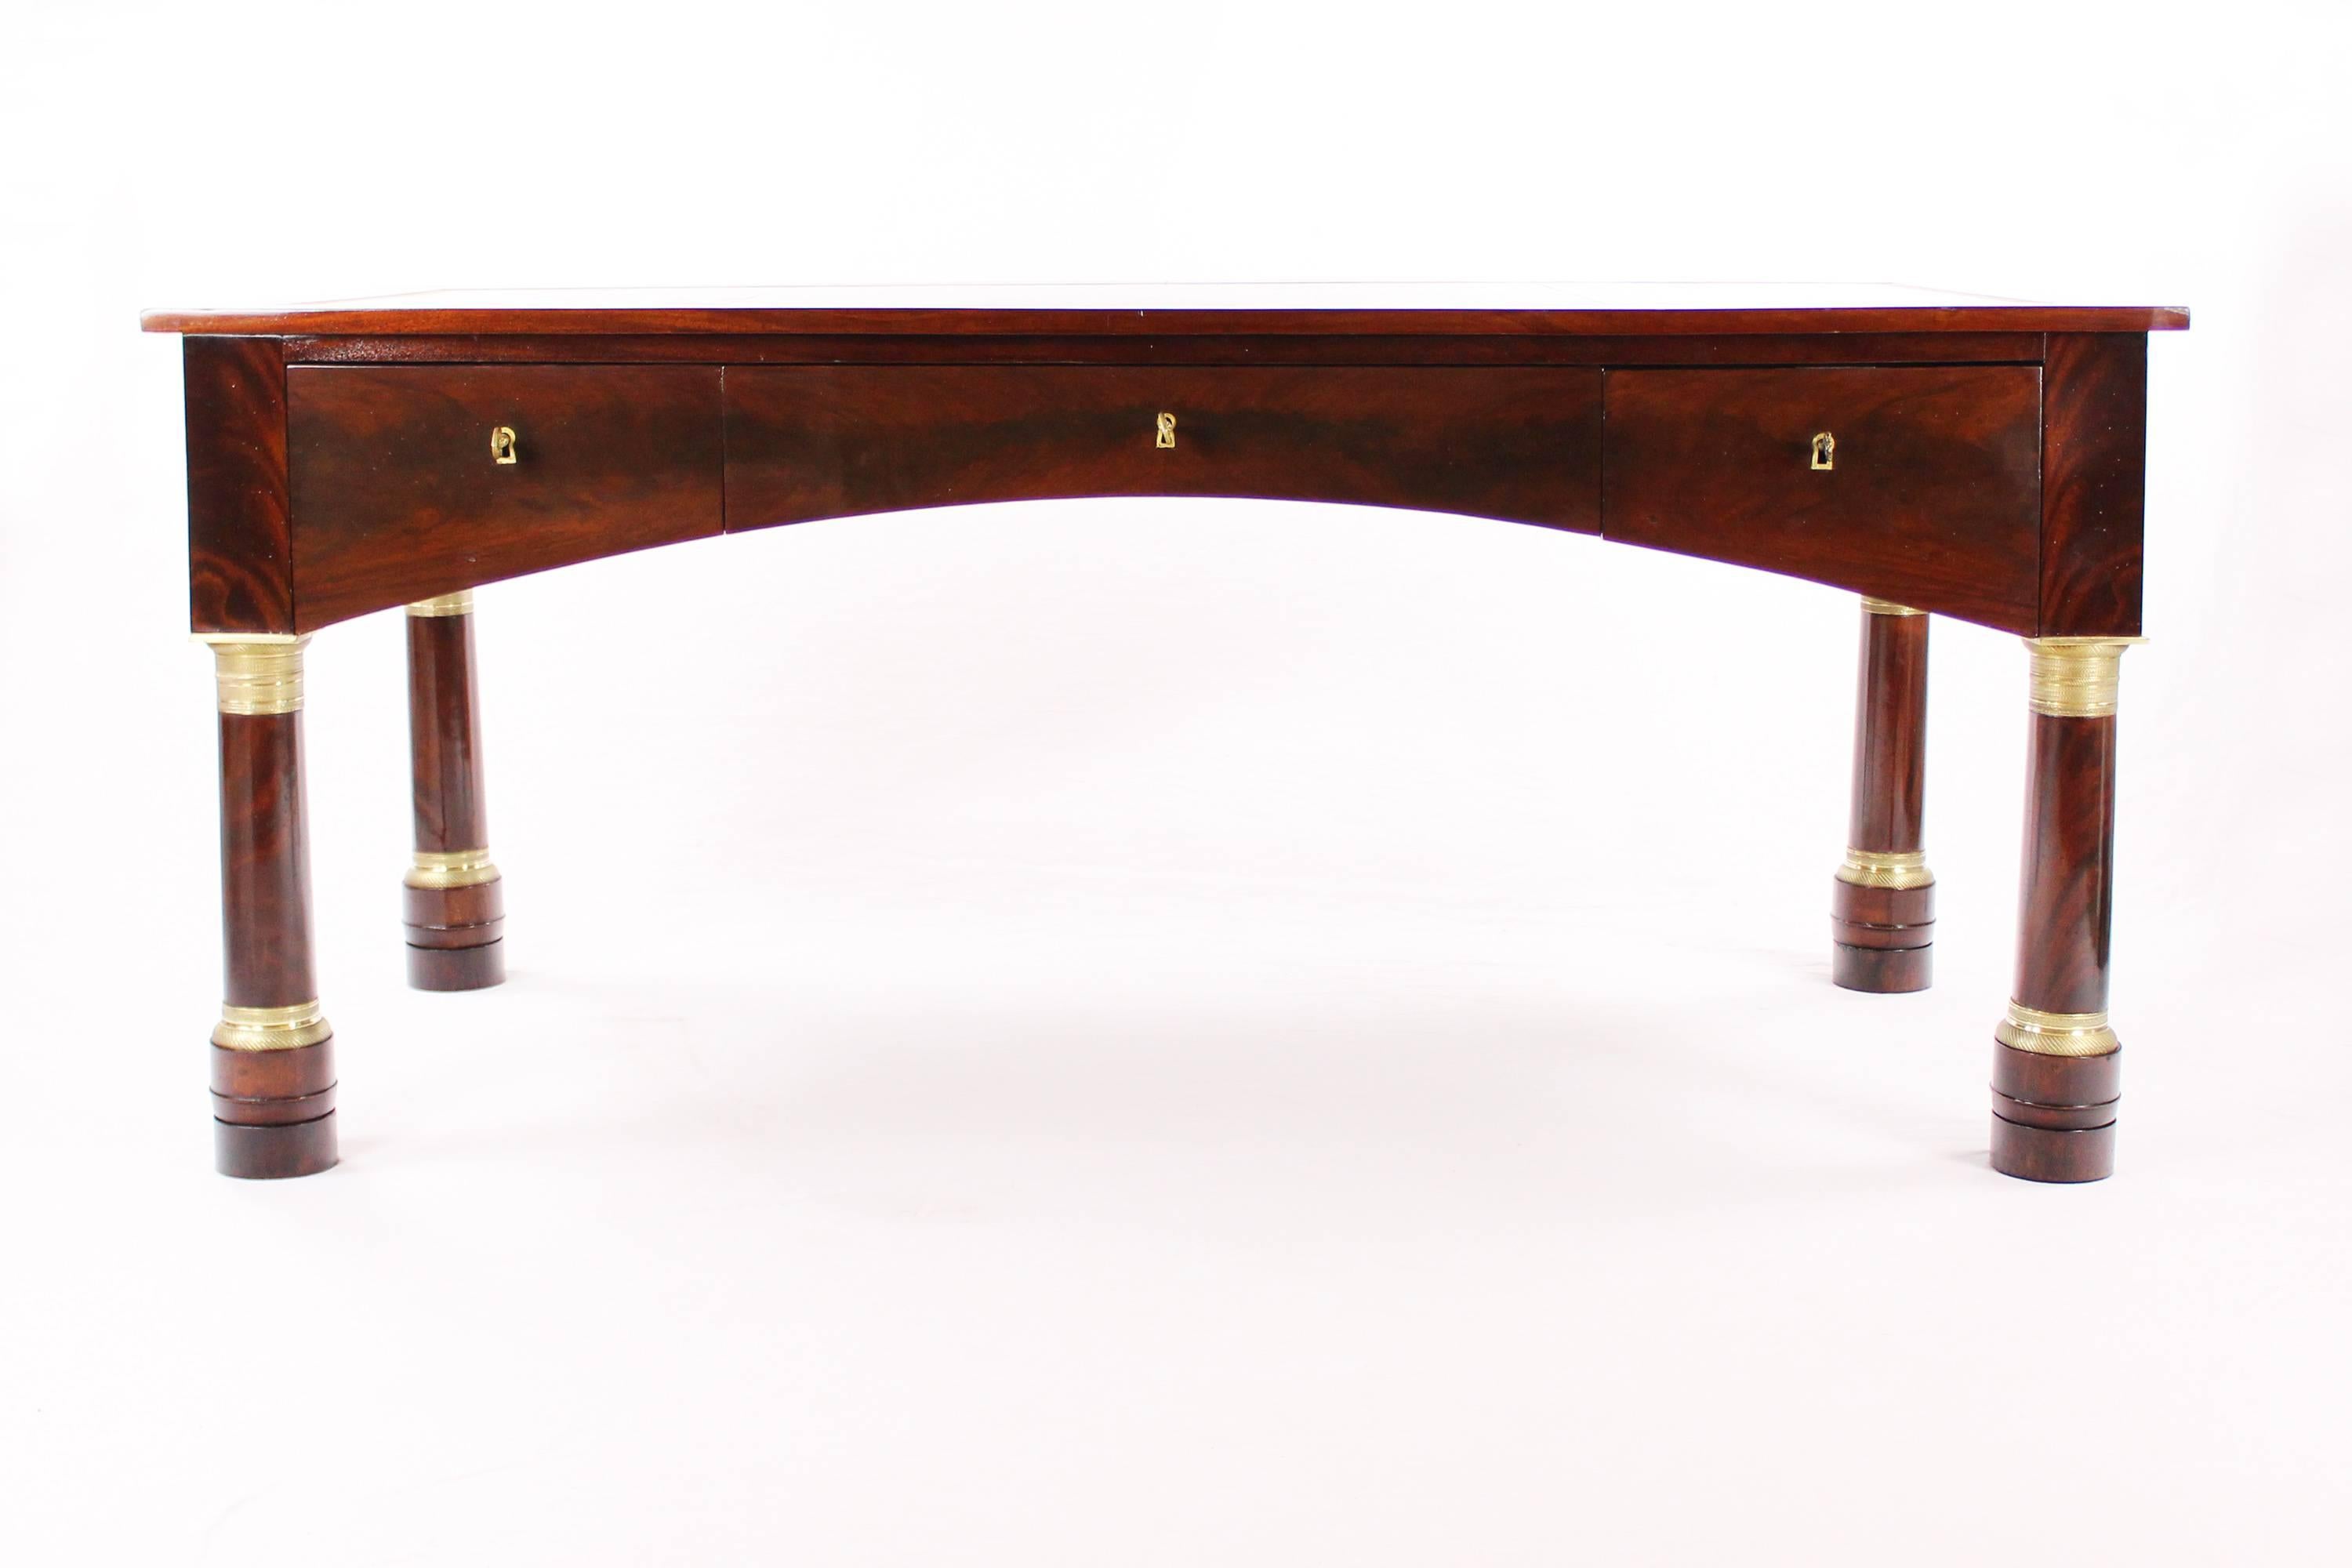 • Unique Empire desk
• Mahogany veneered
• France, circa 1810
• Writing surface with leather insert
• Extendable sides
• Three pushes
• Key sockets with brass border
• Massive column legs with brass capitals and brass tapes
• Restored